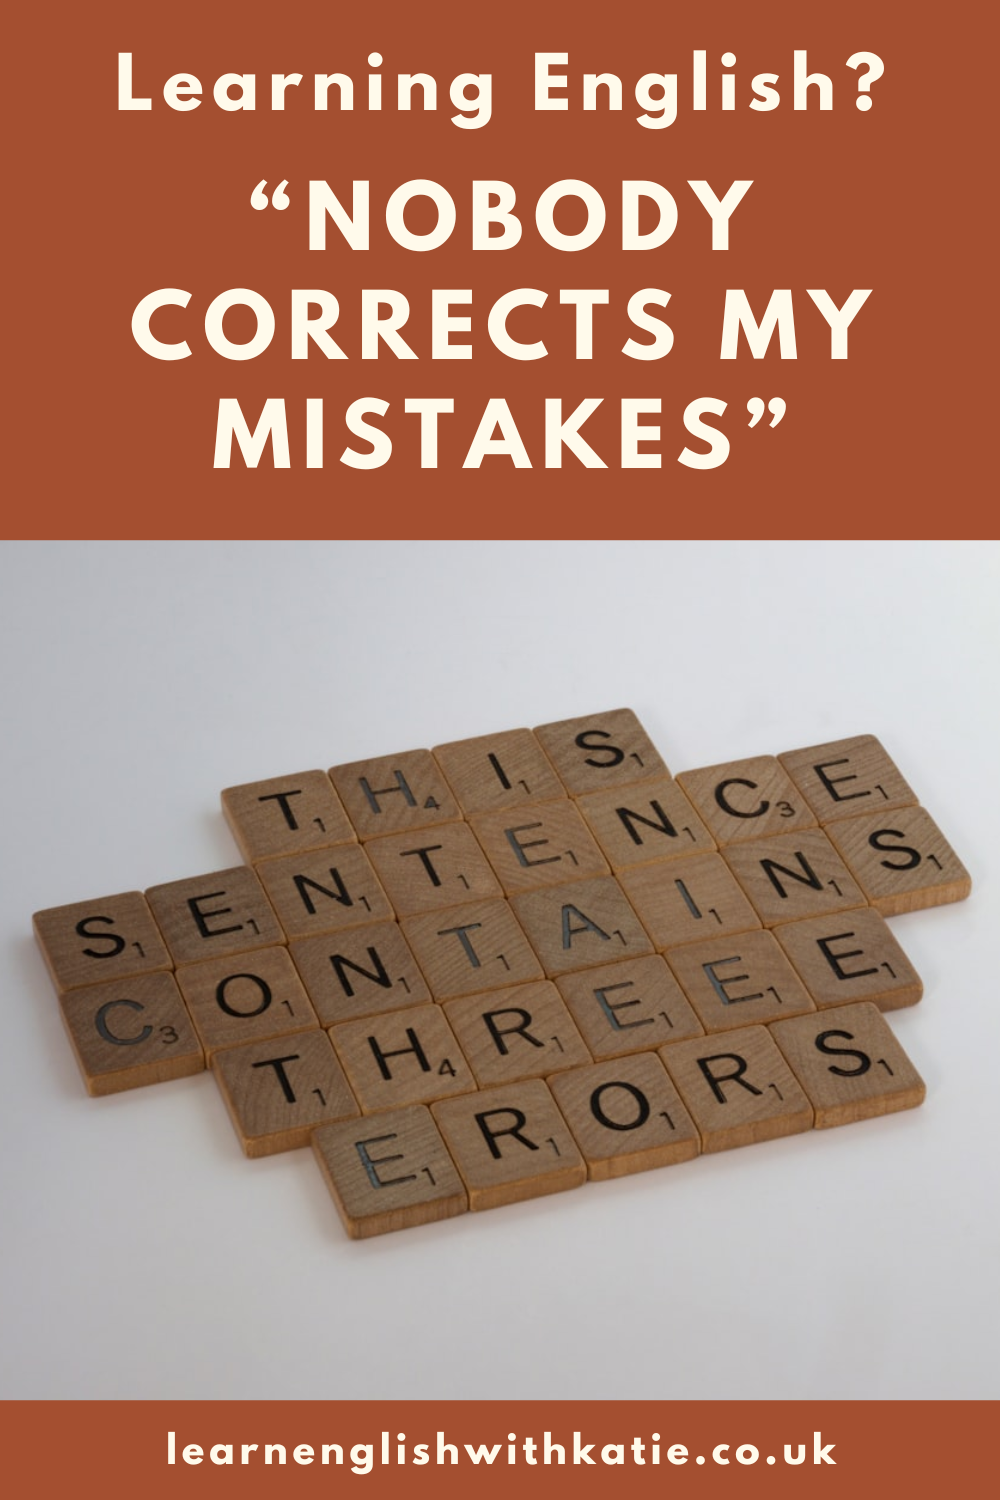 Pinterest pin showing wooden Scrabble tiles spelling out a sentence with deliberate mistakes